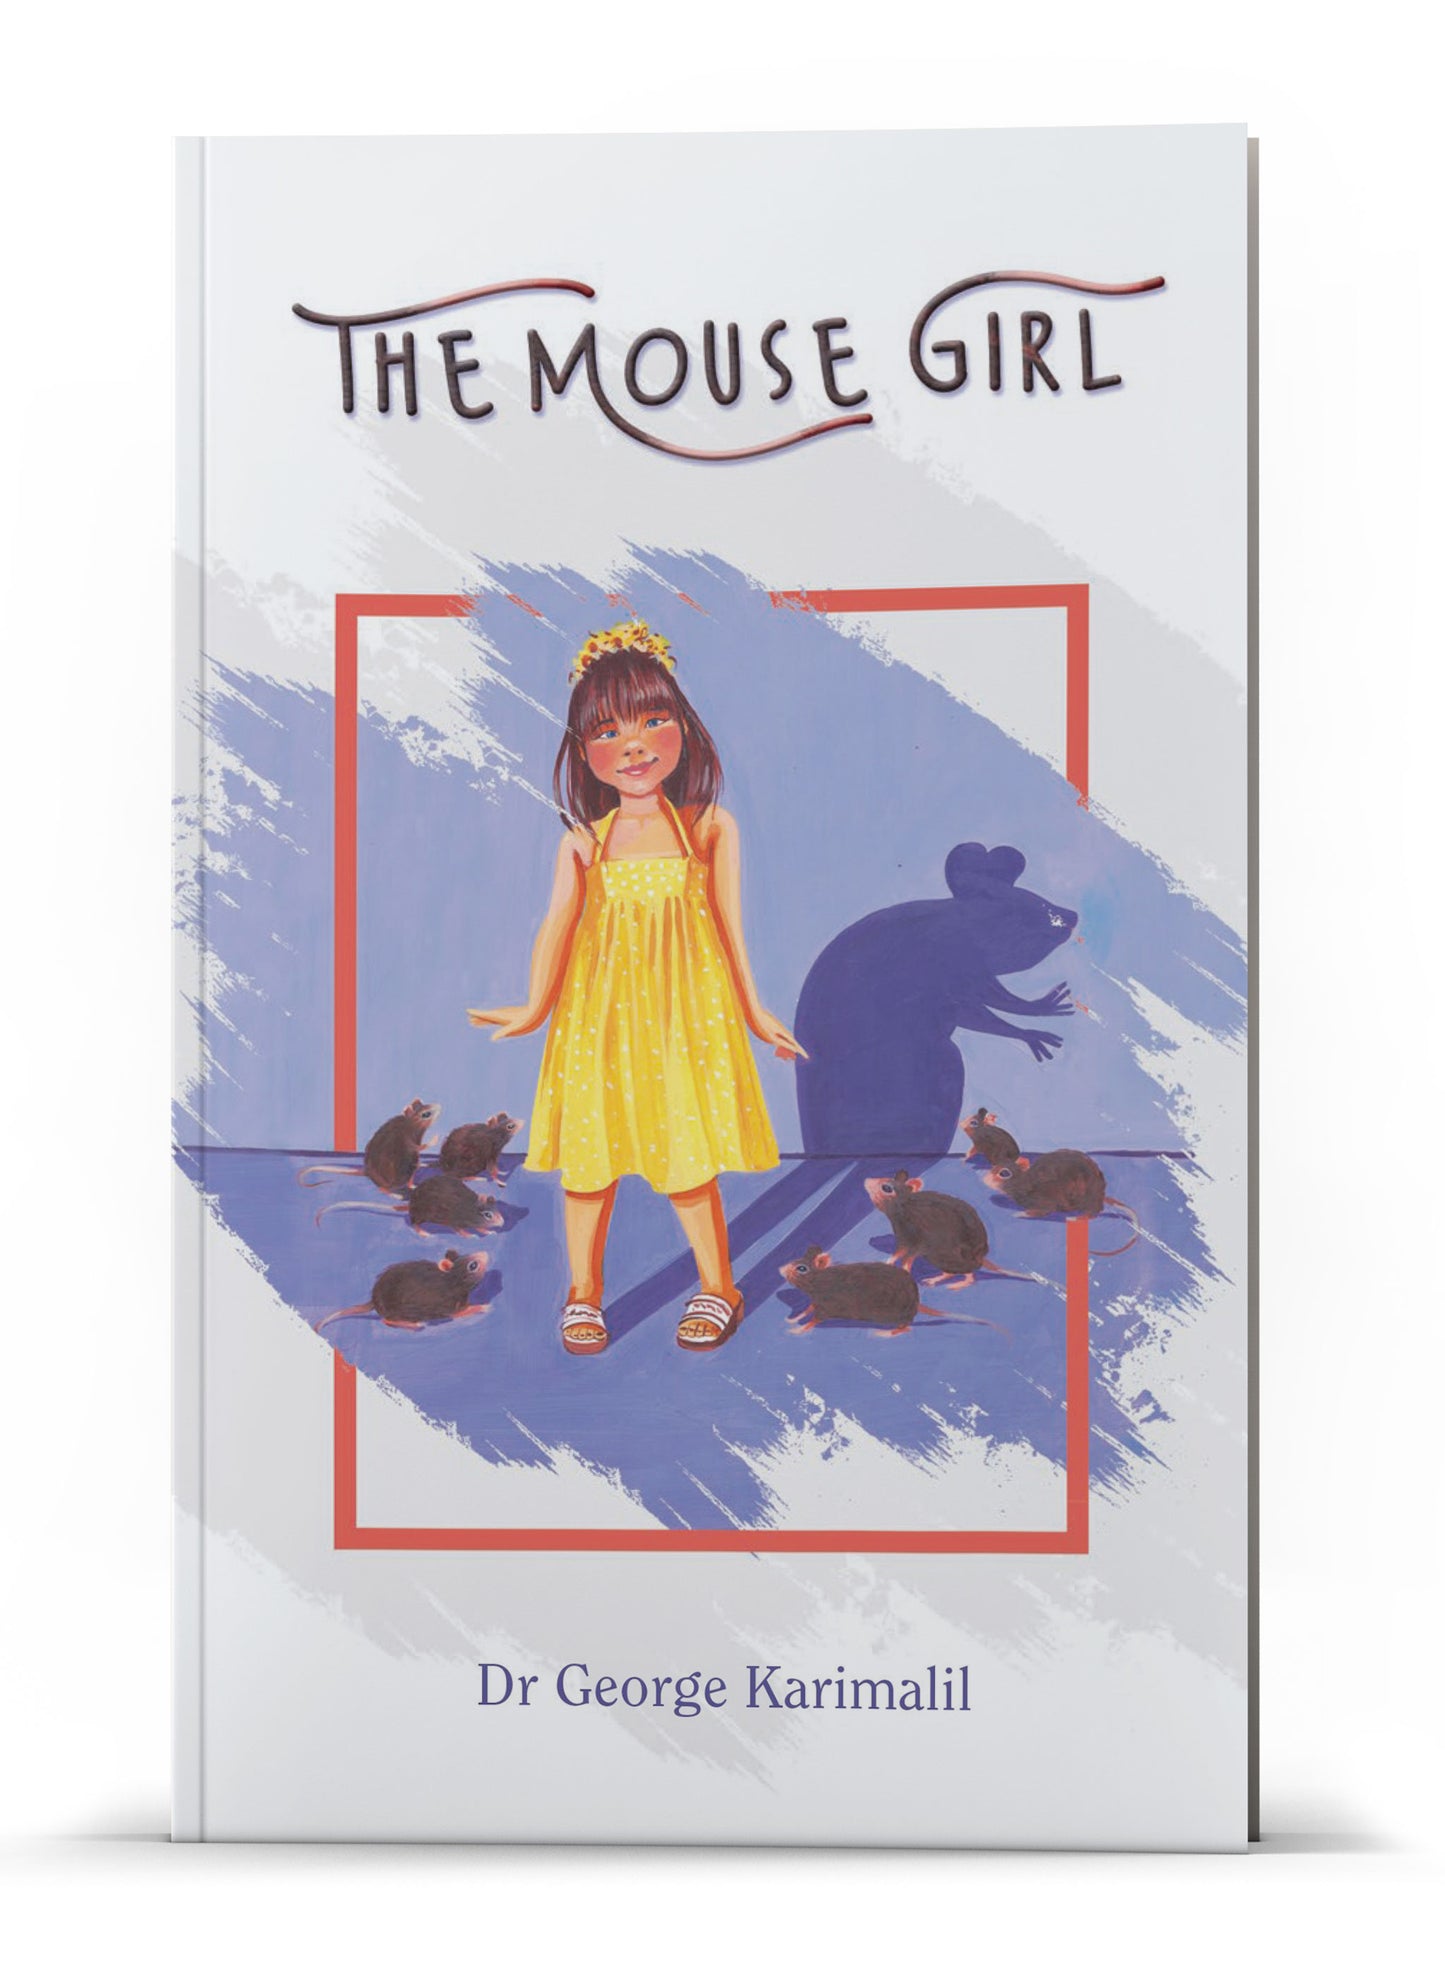 THE MOUSE GIRL